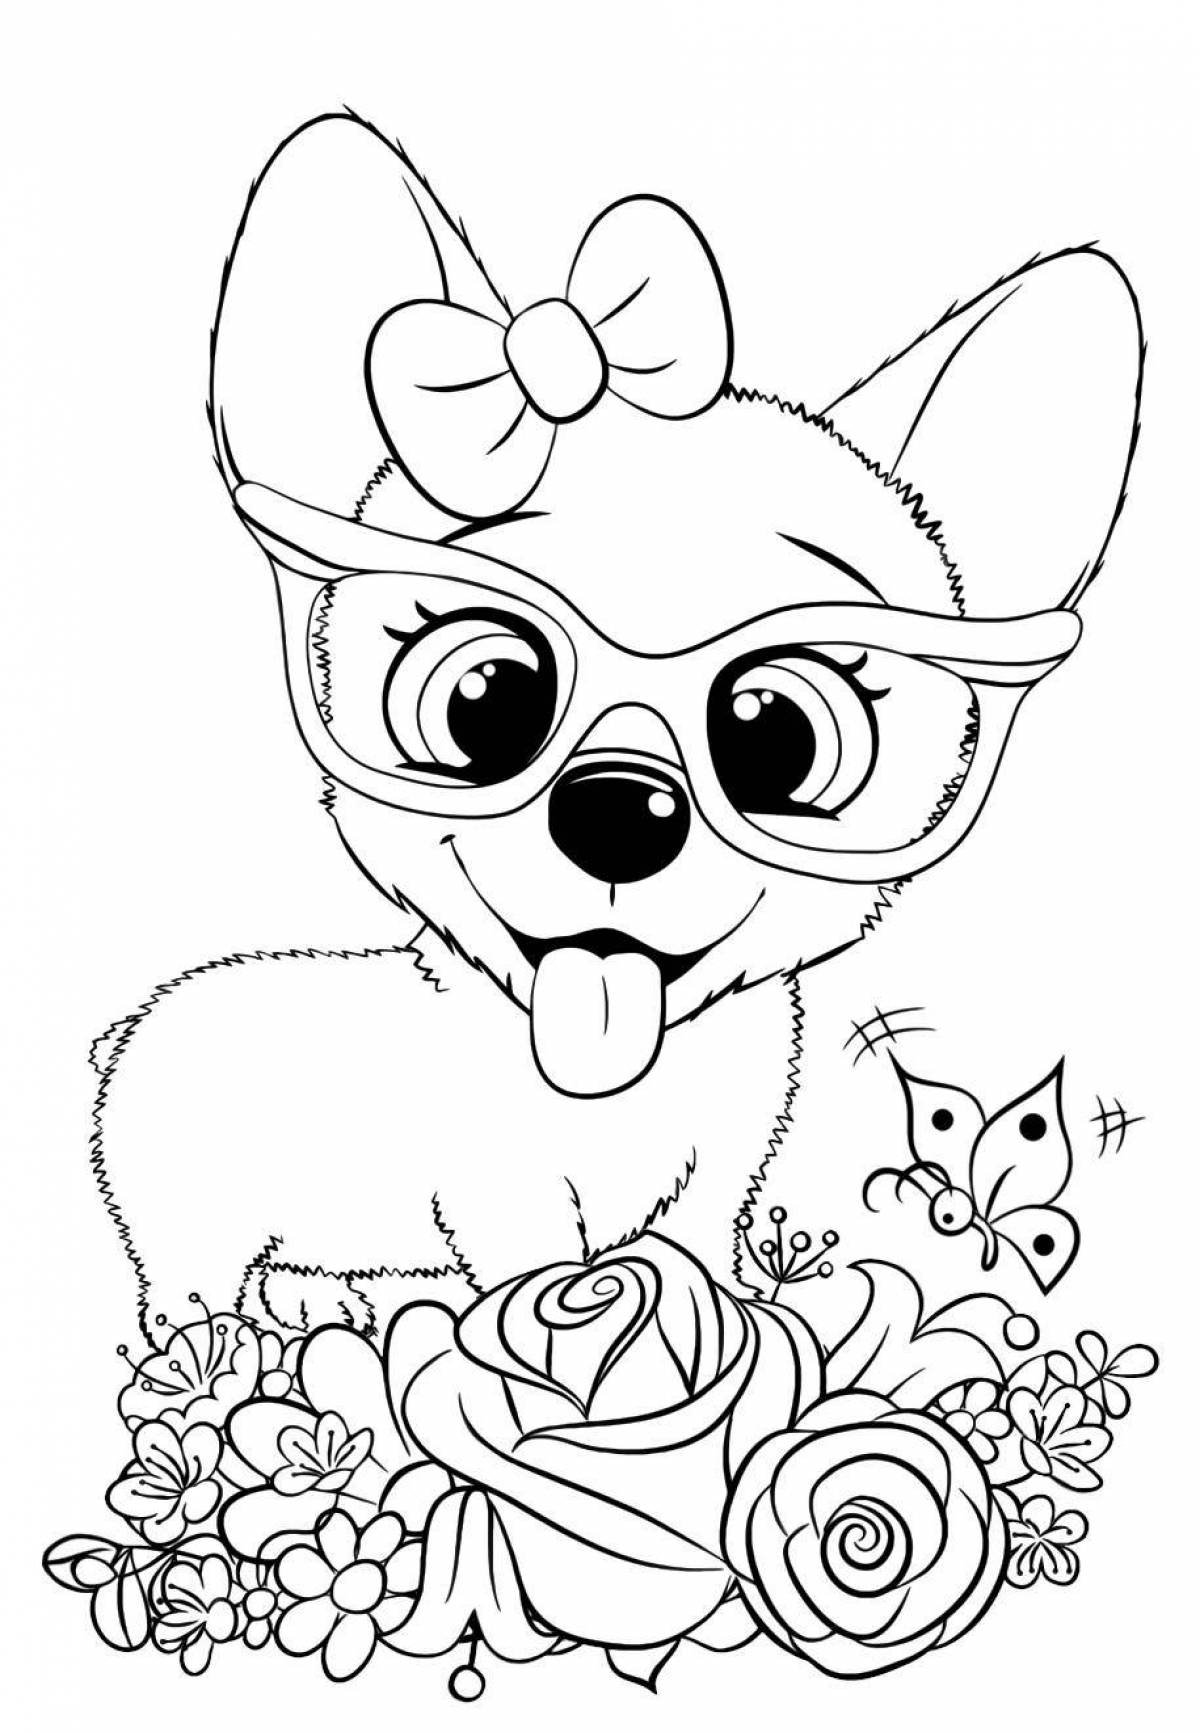 Adorable cute puppy coloring page